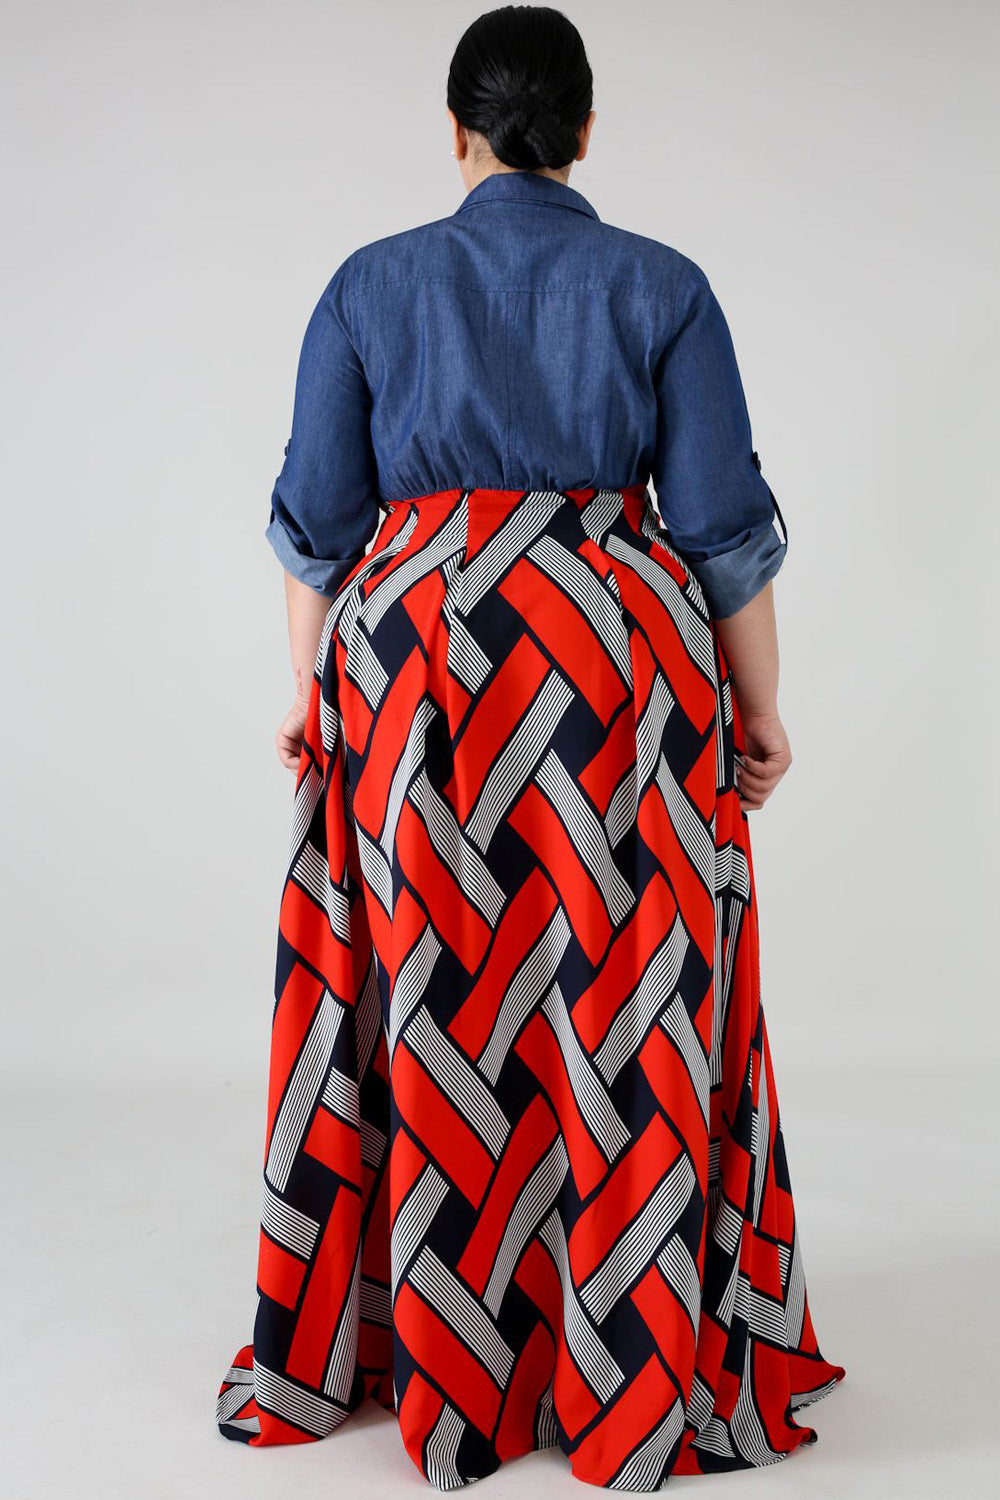 goPals plus size maxi dress with denim shirt and red printed flowy skirt. 